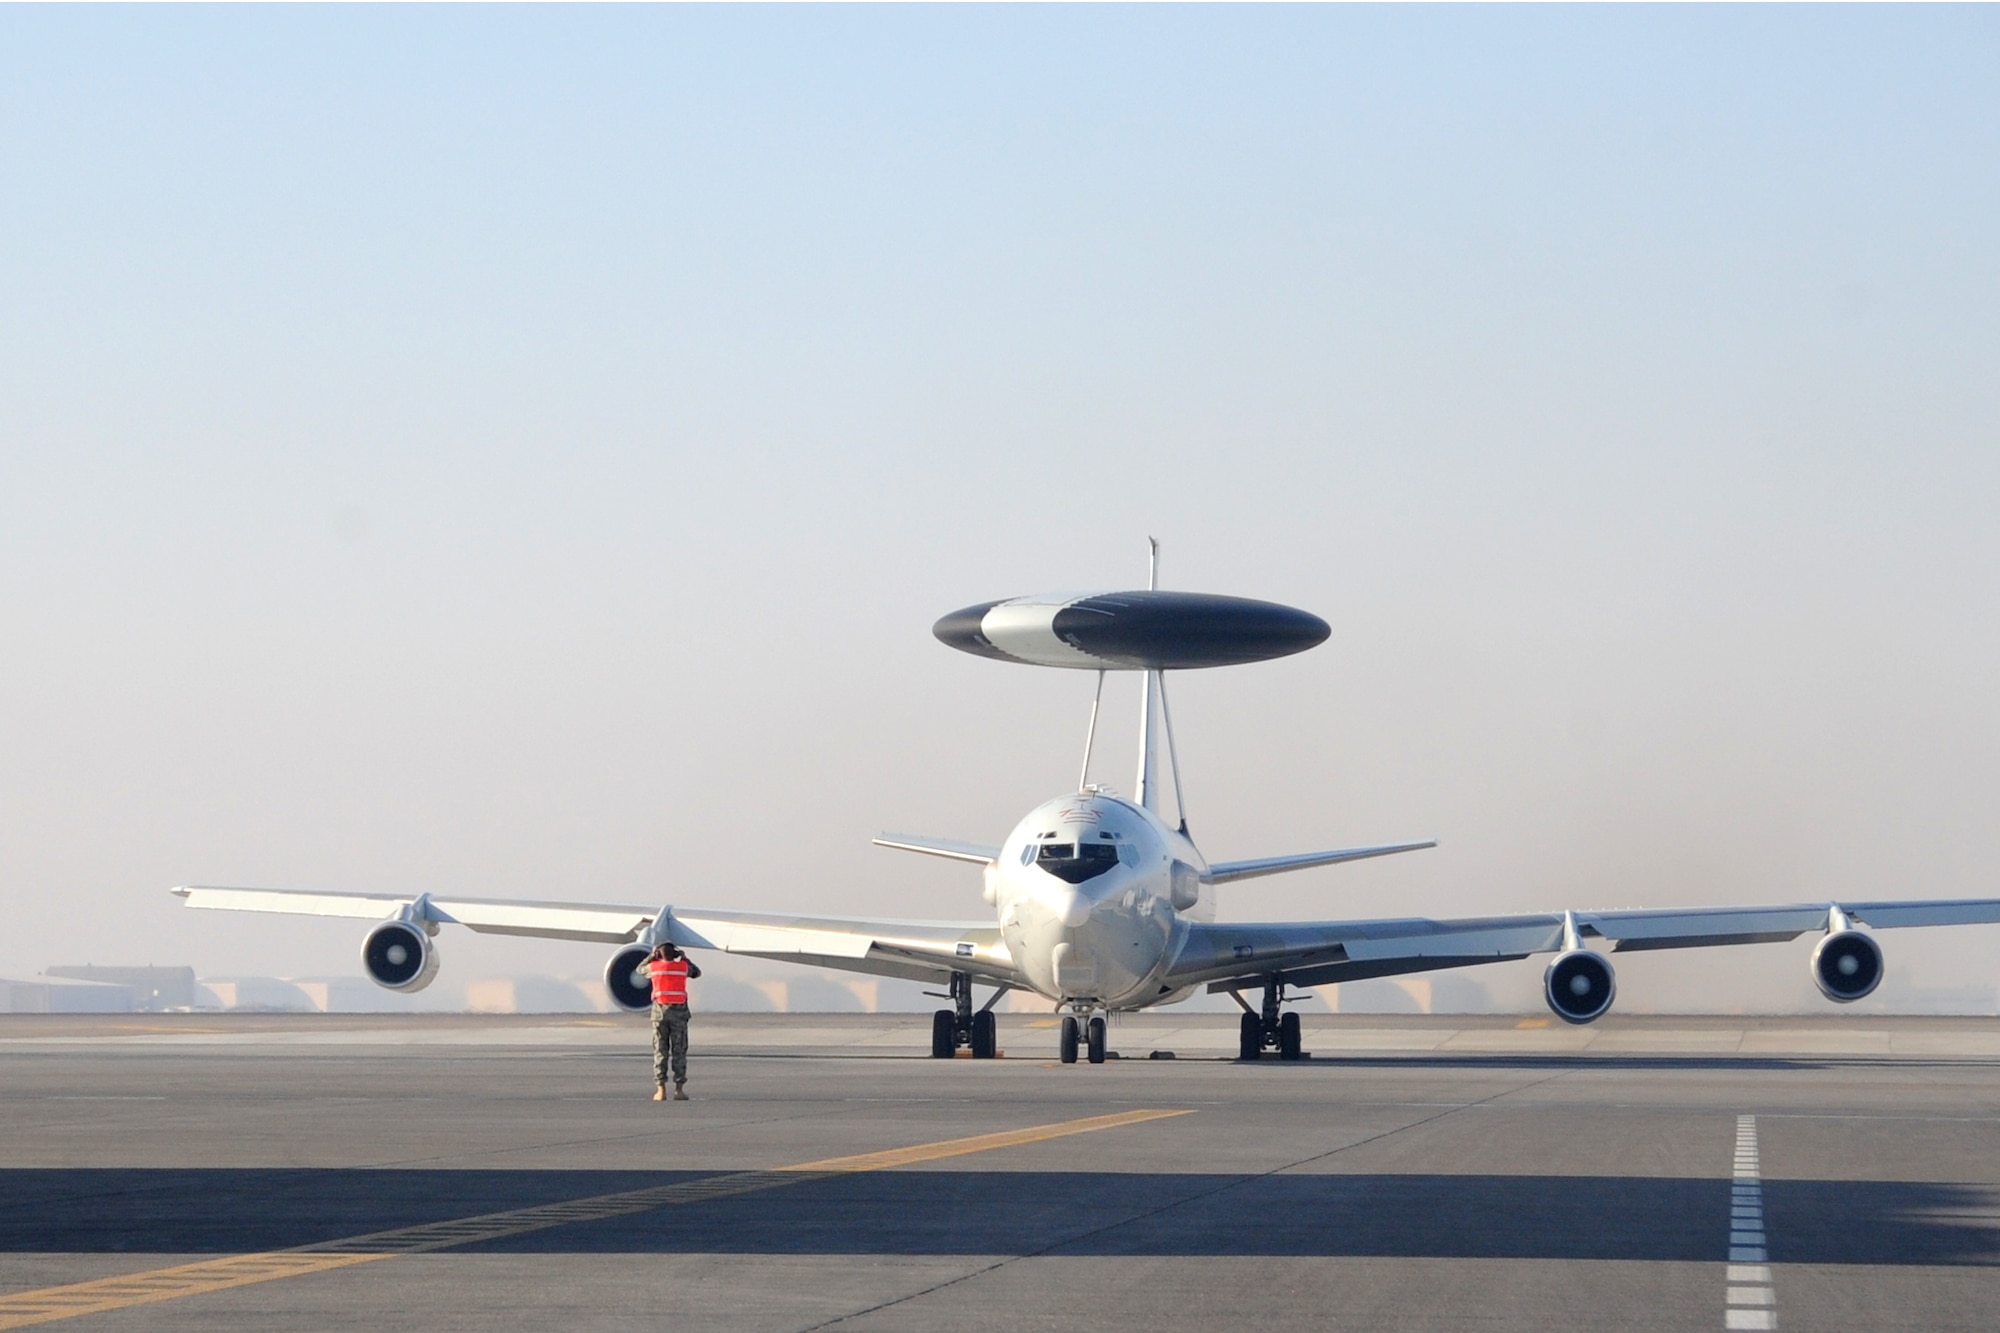 A E-3 Sentry Airborne Warning and Control System aircraft taxis out to the runway at an undisclosed location in Southwest Asia on Jan. 16.The E-3 Sentry is a modified Boeing 707/320 commercial airframe with a rotating radar dome that provides situational awareness of friendly, neutral and hostile activity, command and control of an area of responsibility, battle management of theater forces, all-altitude and all-weather surveillance of the battle space, and early warning of enemy actions during joint, allied, and coalition operations. (U.S. Air Force photo/Senior Airman Jenifer H. Calhoun/Released)
